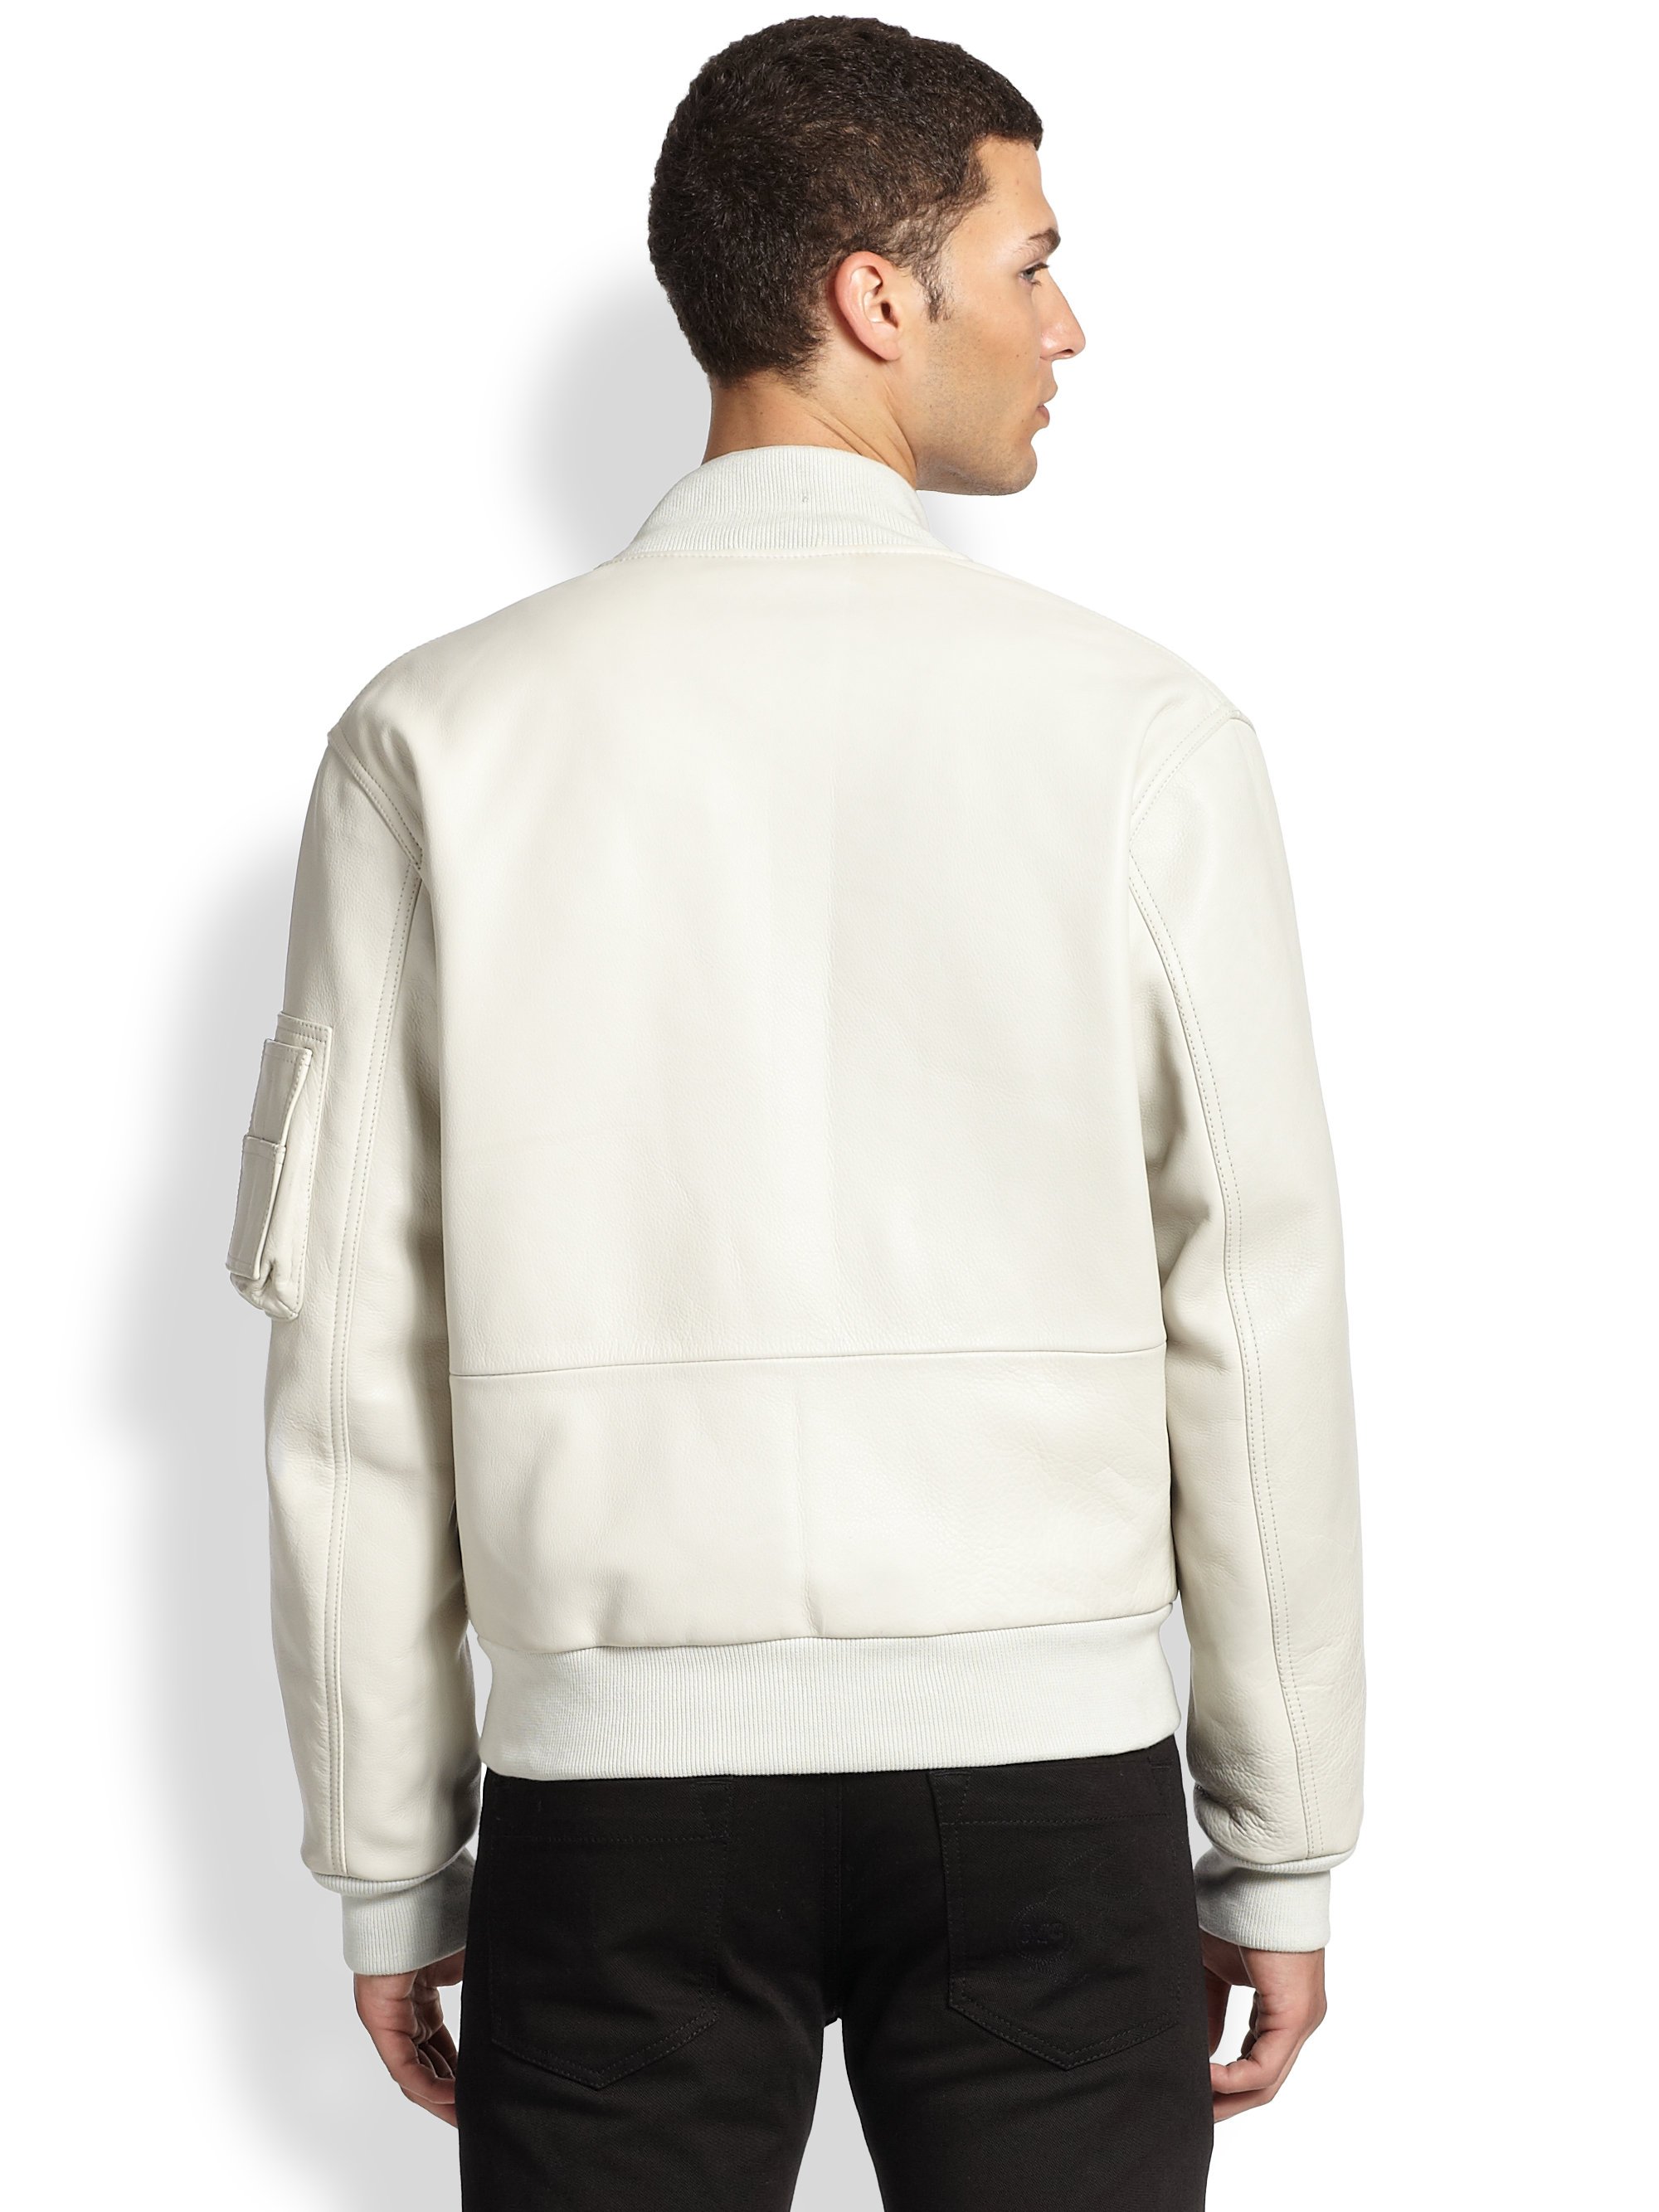 Lyst - Mcq Leather Bomber Jacket in White for Men